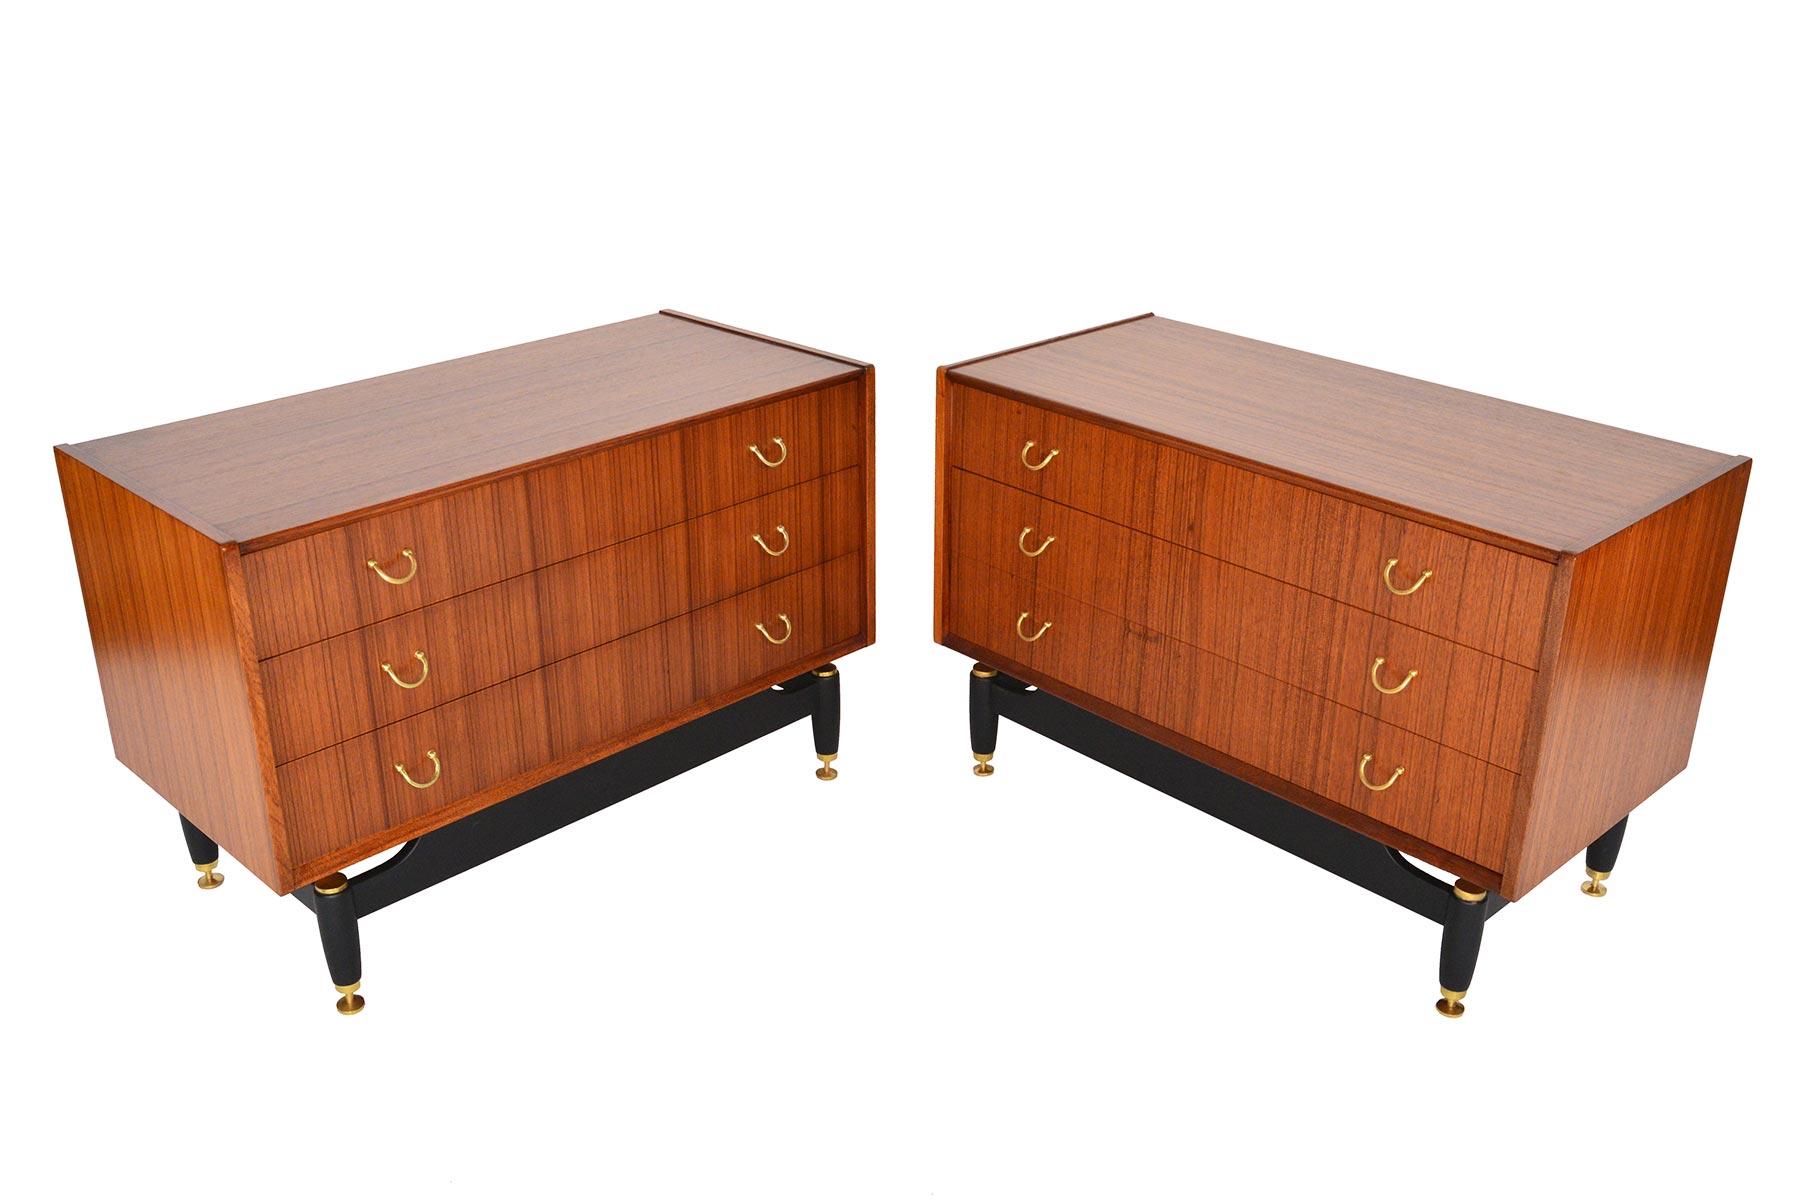 This handsome pair of G Plan Librenza range tola and black gentleman’s chests offer a Italian stylings with exceptional English construction. Each chest is cased in bookmatched tola and drawer fronts feature original brass handles. Cases float on a